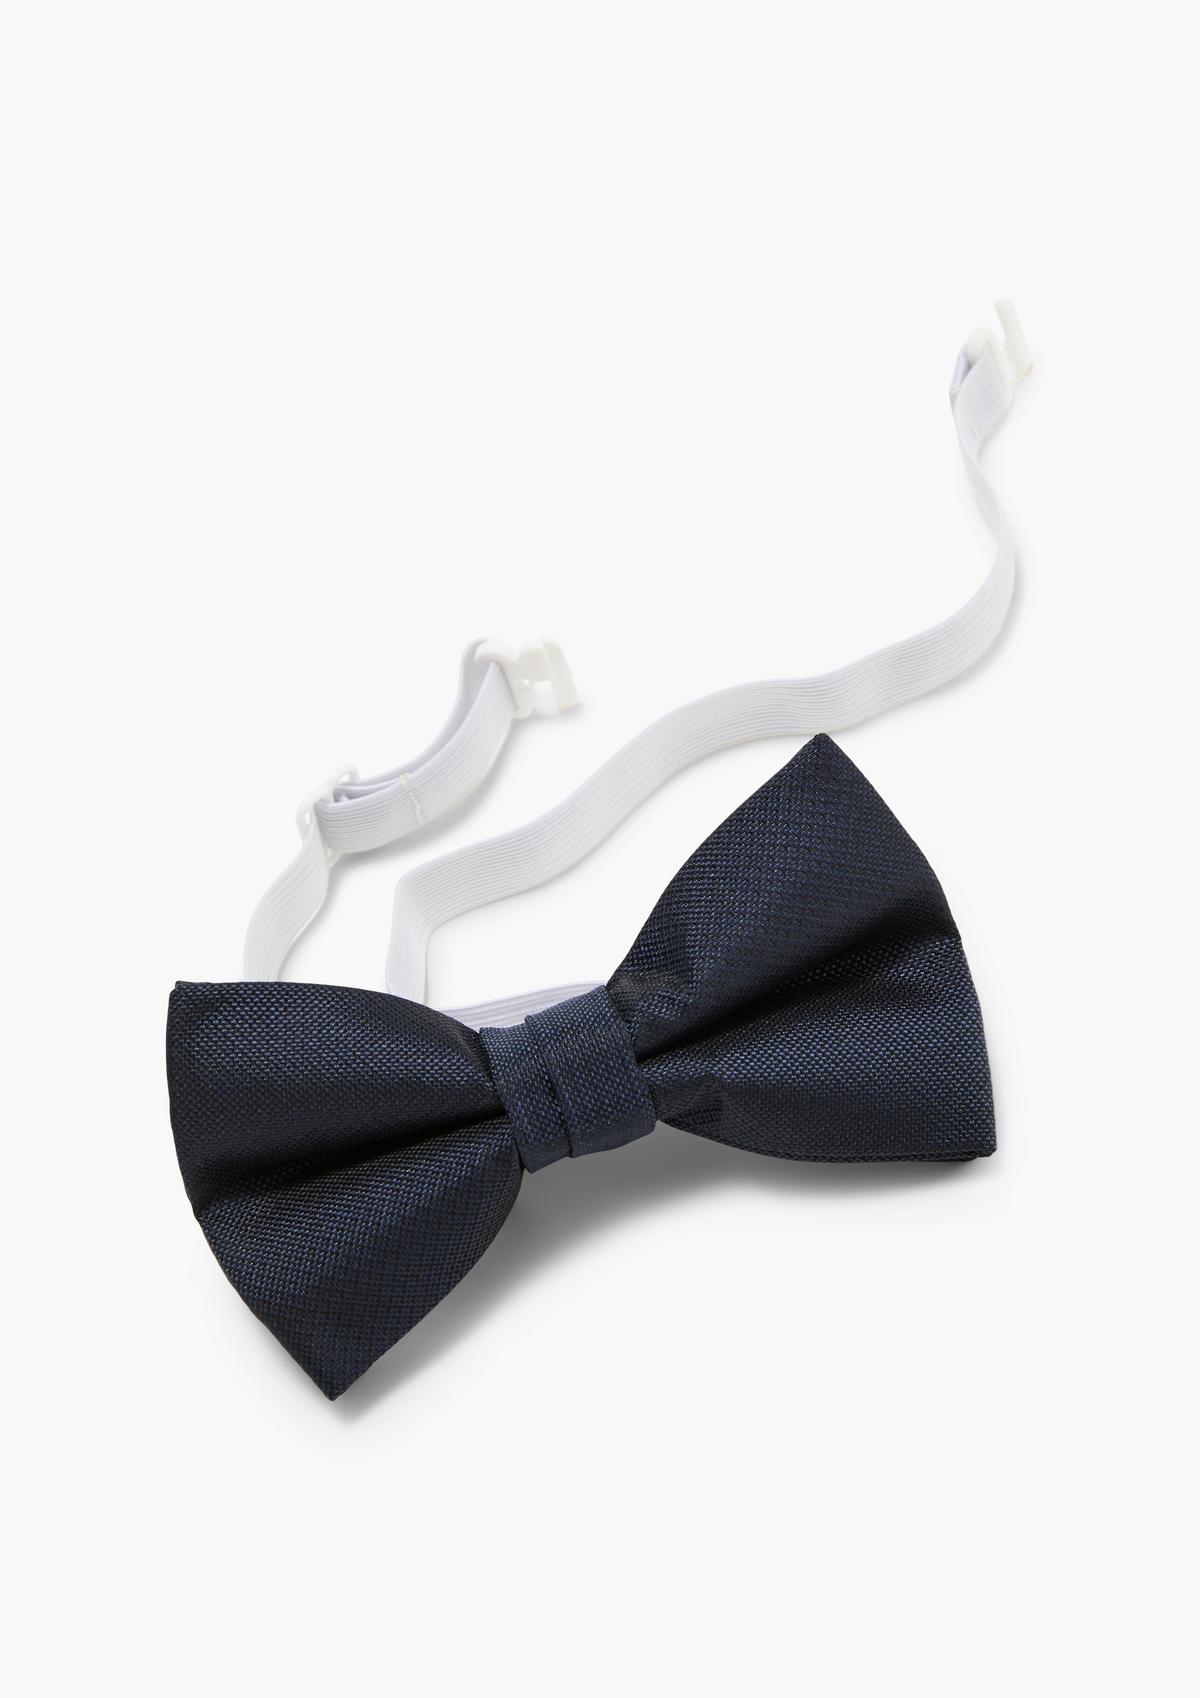 s.Oliver Bow tie with a hook fastener